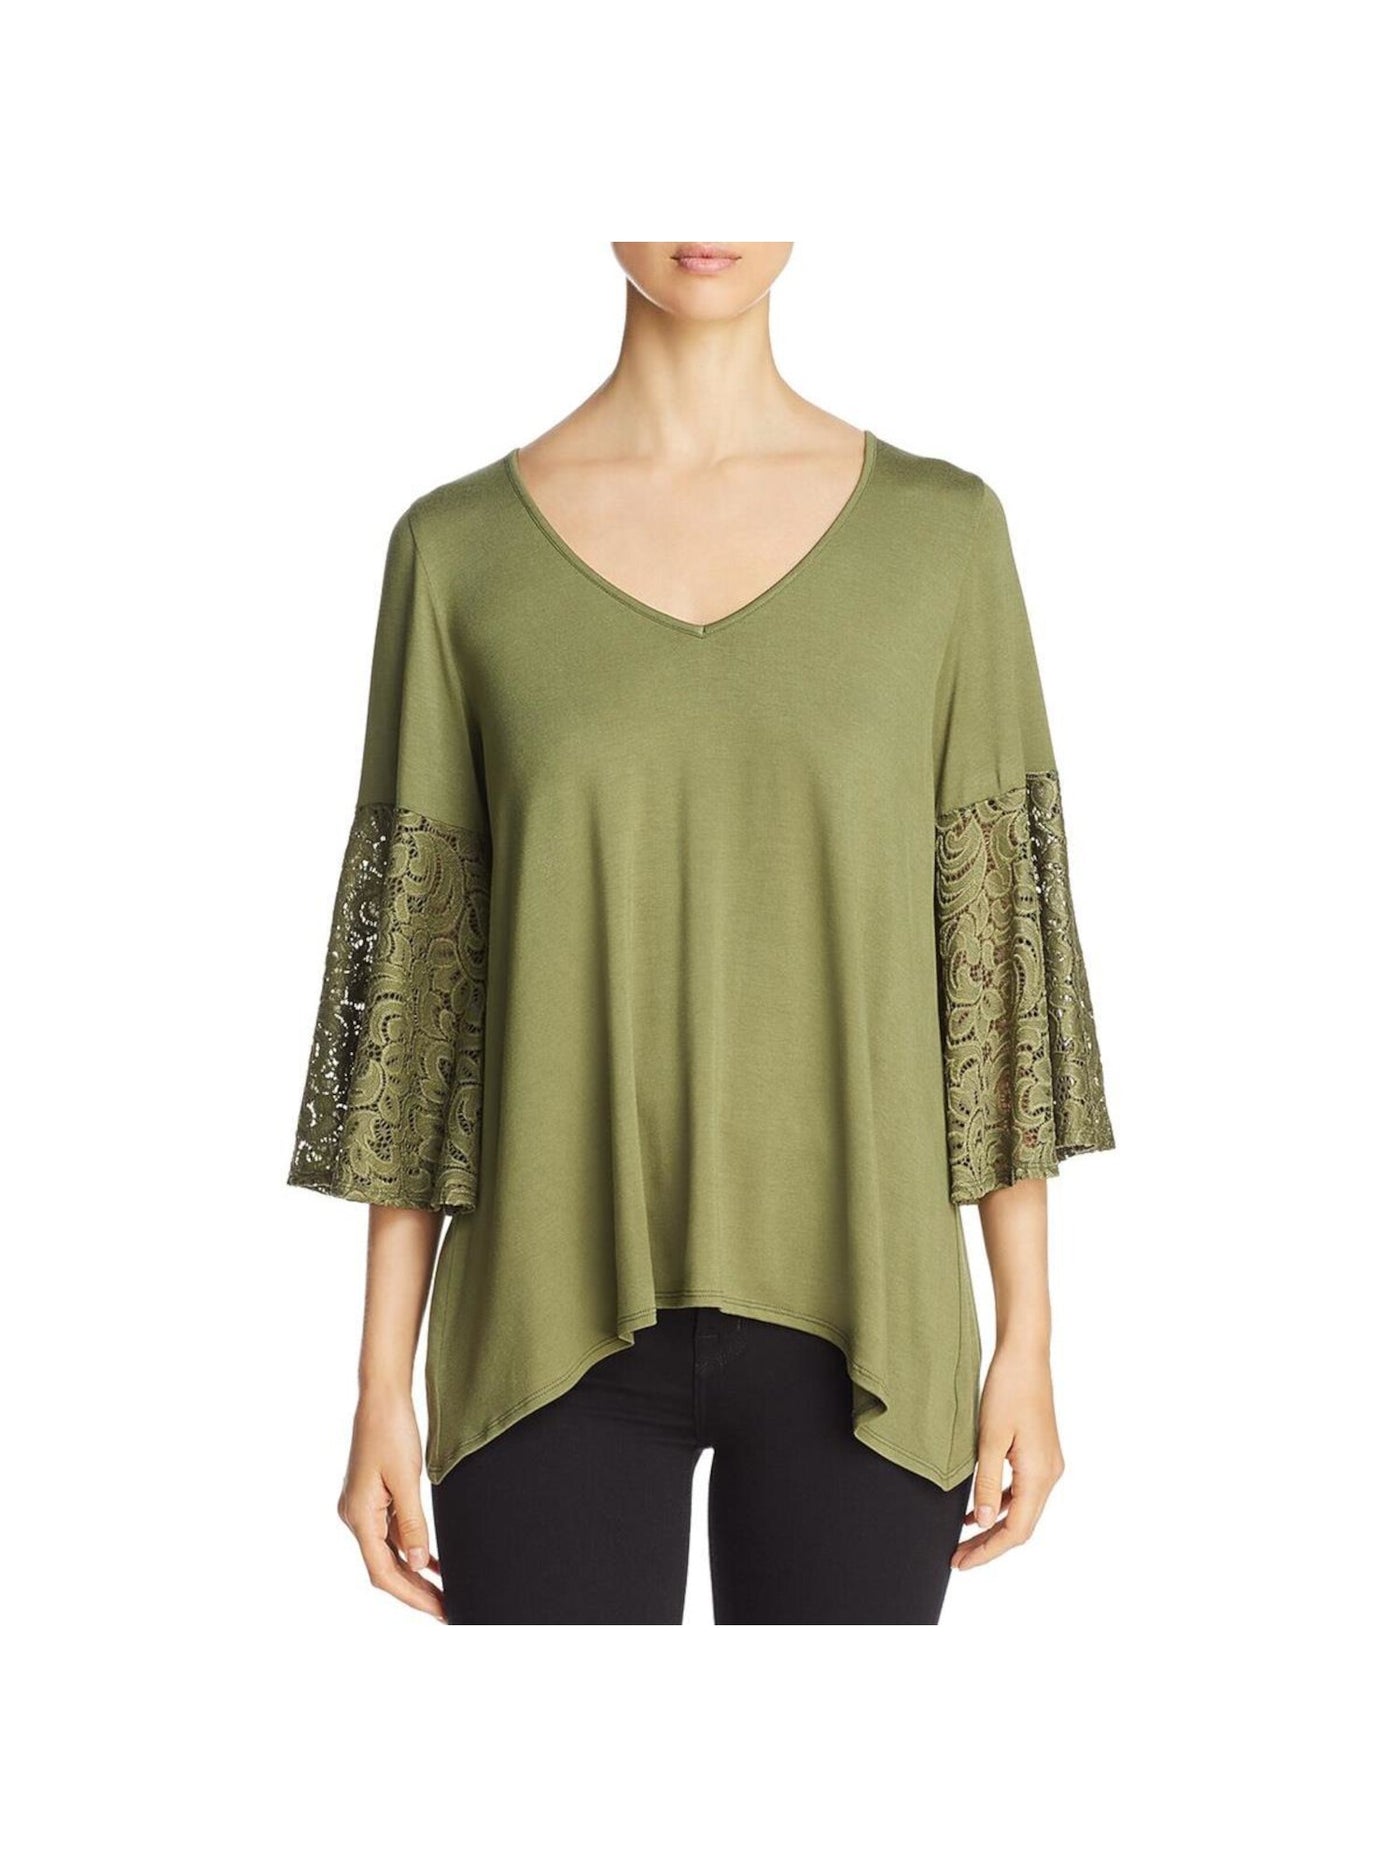 STATUS BY CHENAULT Womens Green Stretch Lace Pullover Styling Bell Sleeve V Neck Blouse M